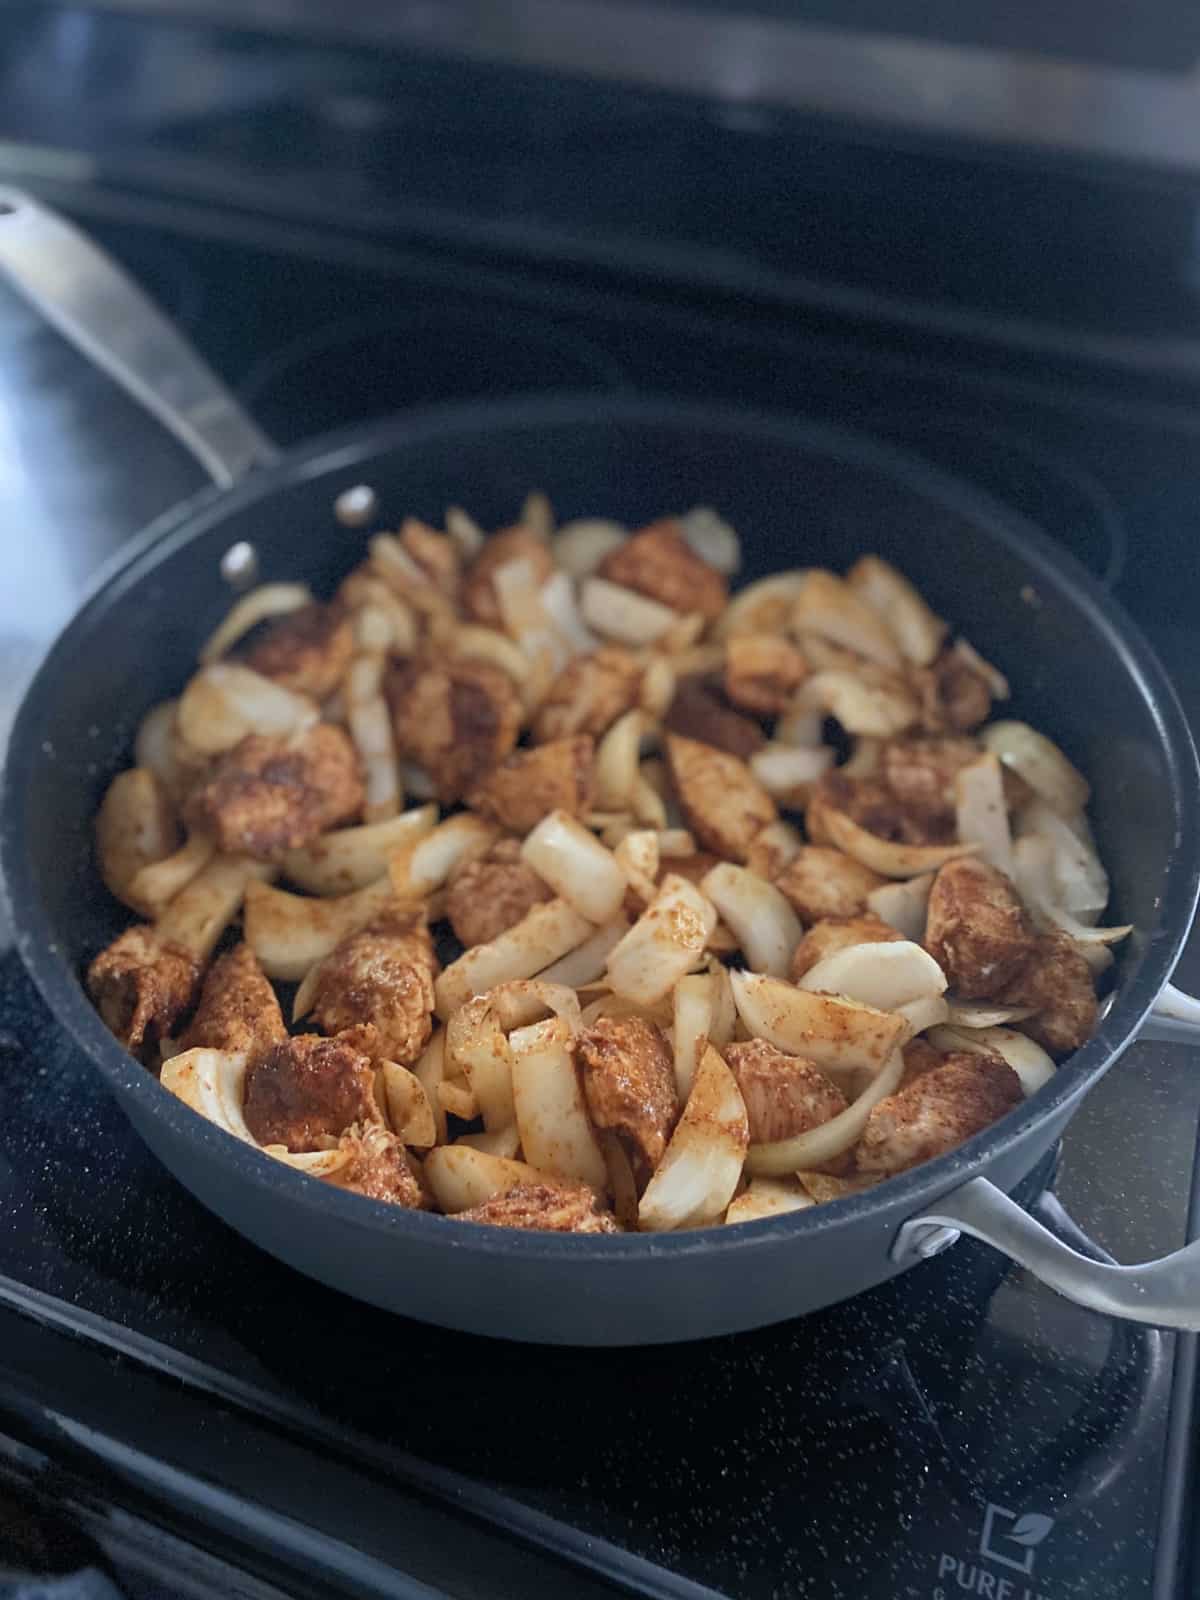 Skillet cooking on a glasstop stove filled with chicken and onions.